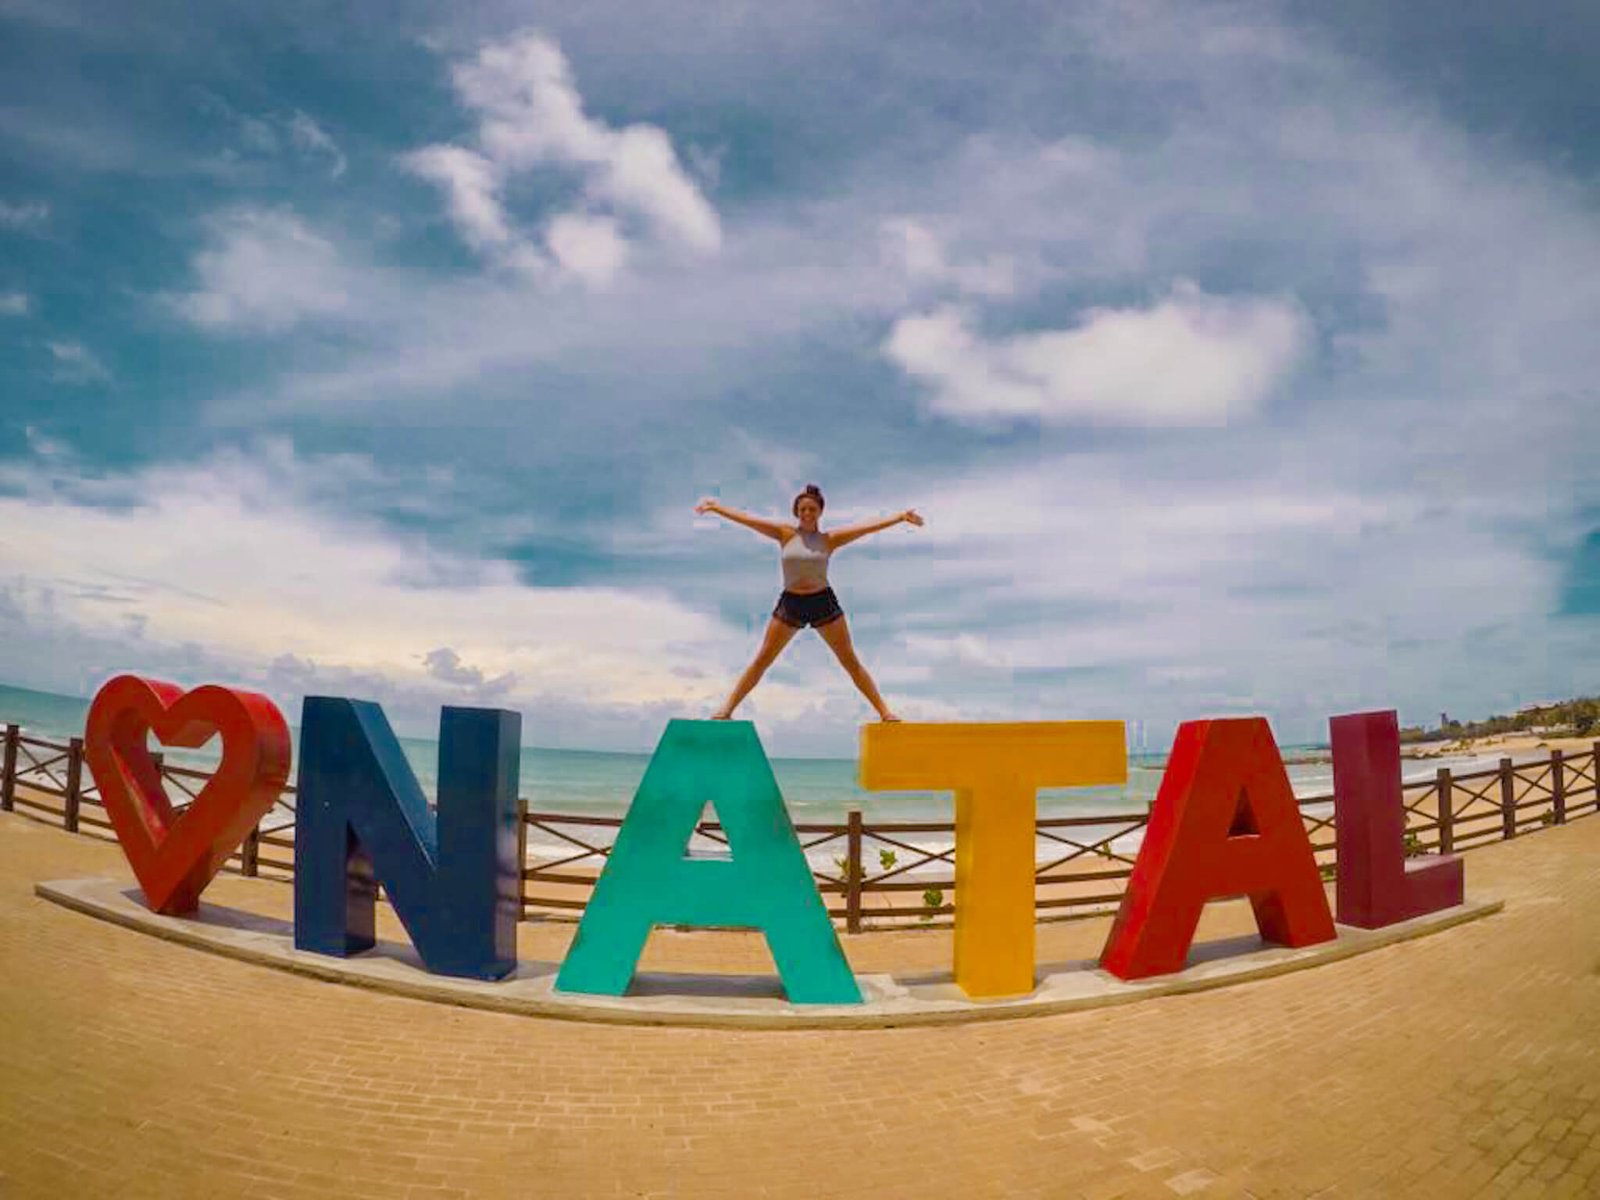 Natal sign, things to do in Natal, Brazil